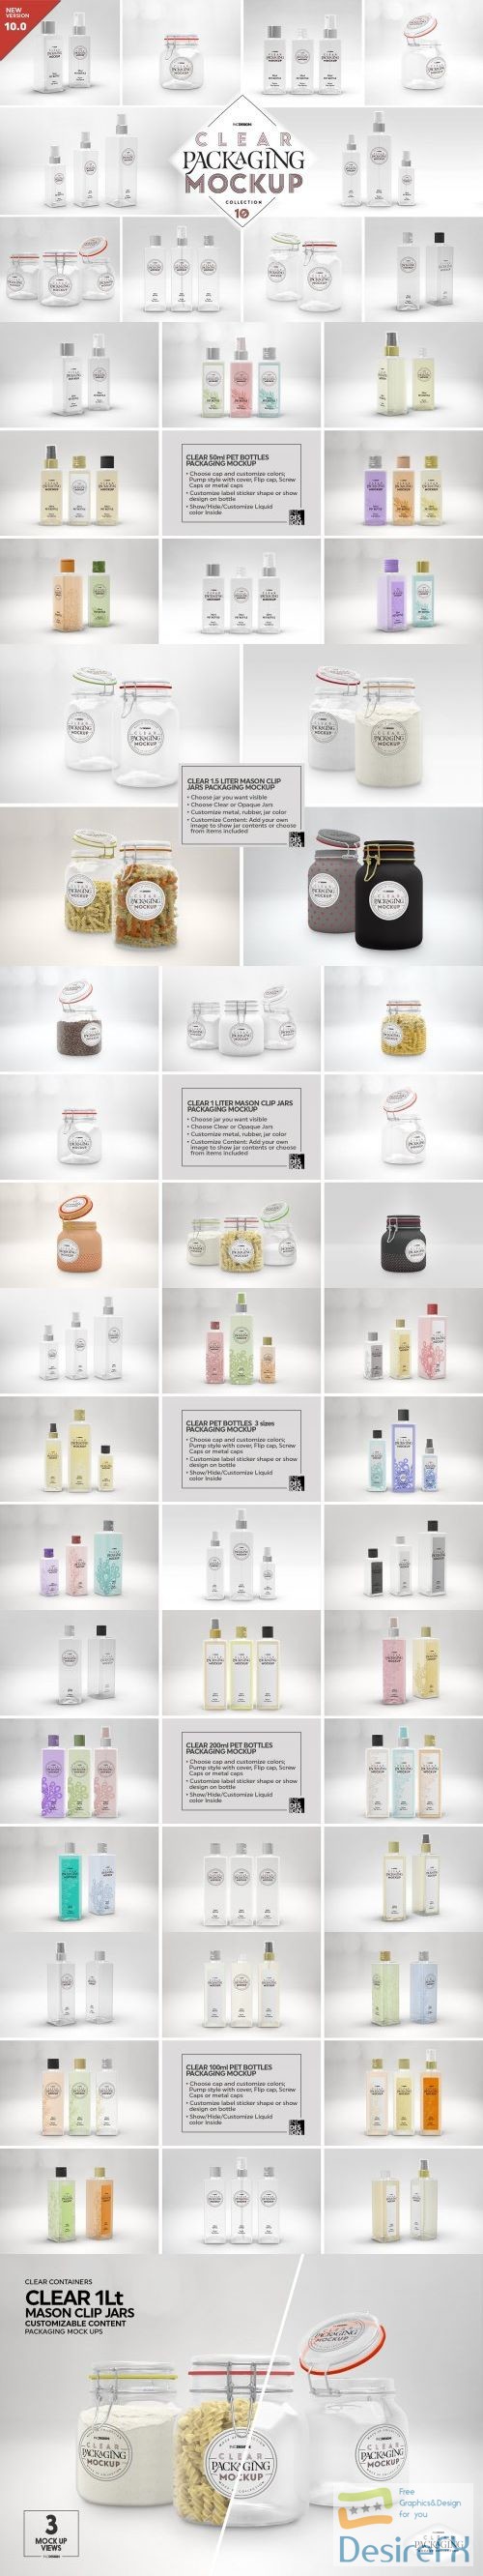 10 Clear Container Packaging Mockups - 3991572